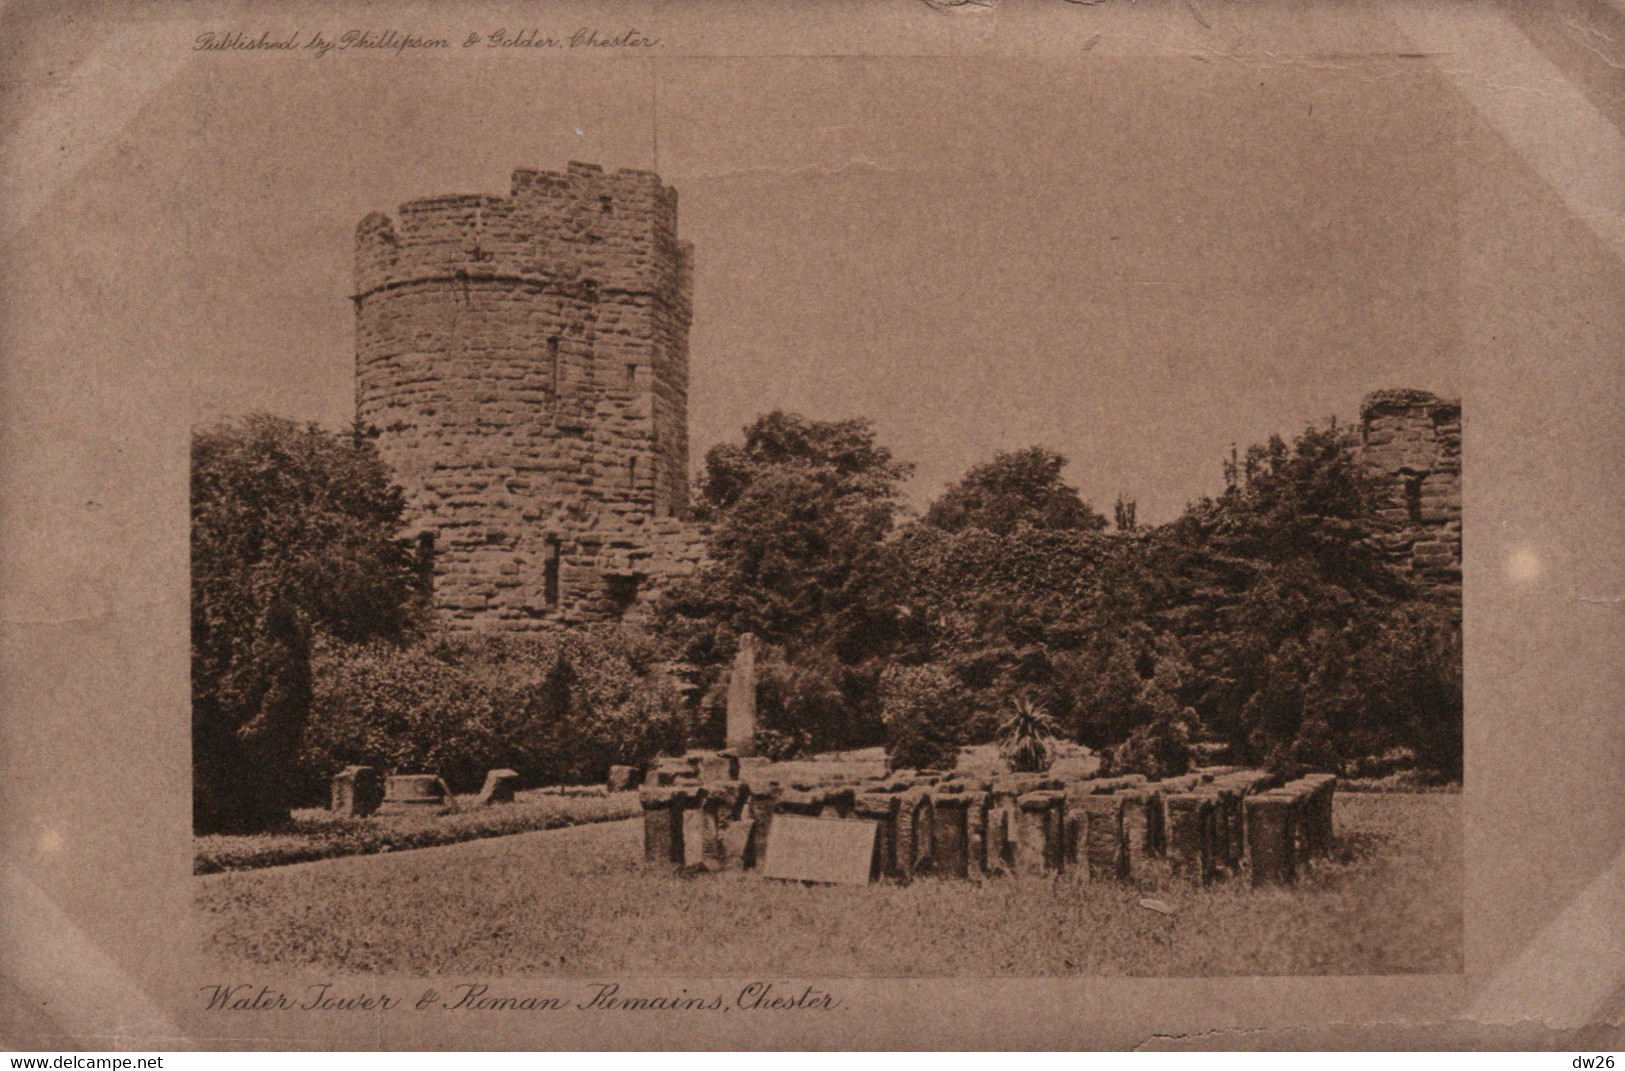 Water Tower & Roman Remains, Chester - Published By Phillipson & Golder 1910 - Chester